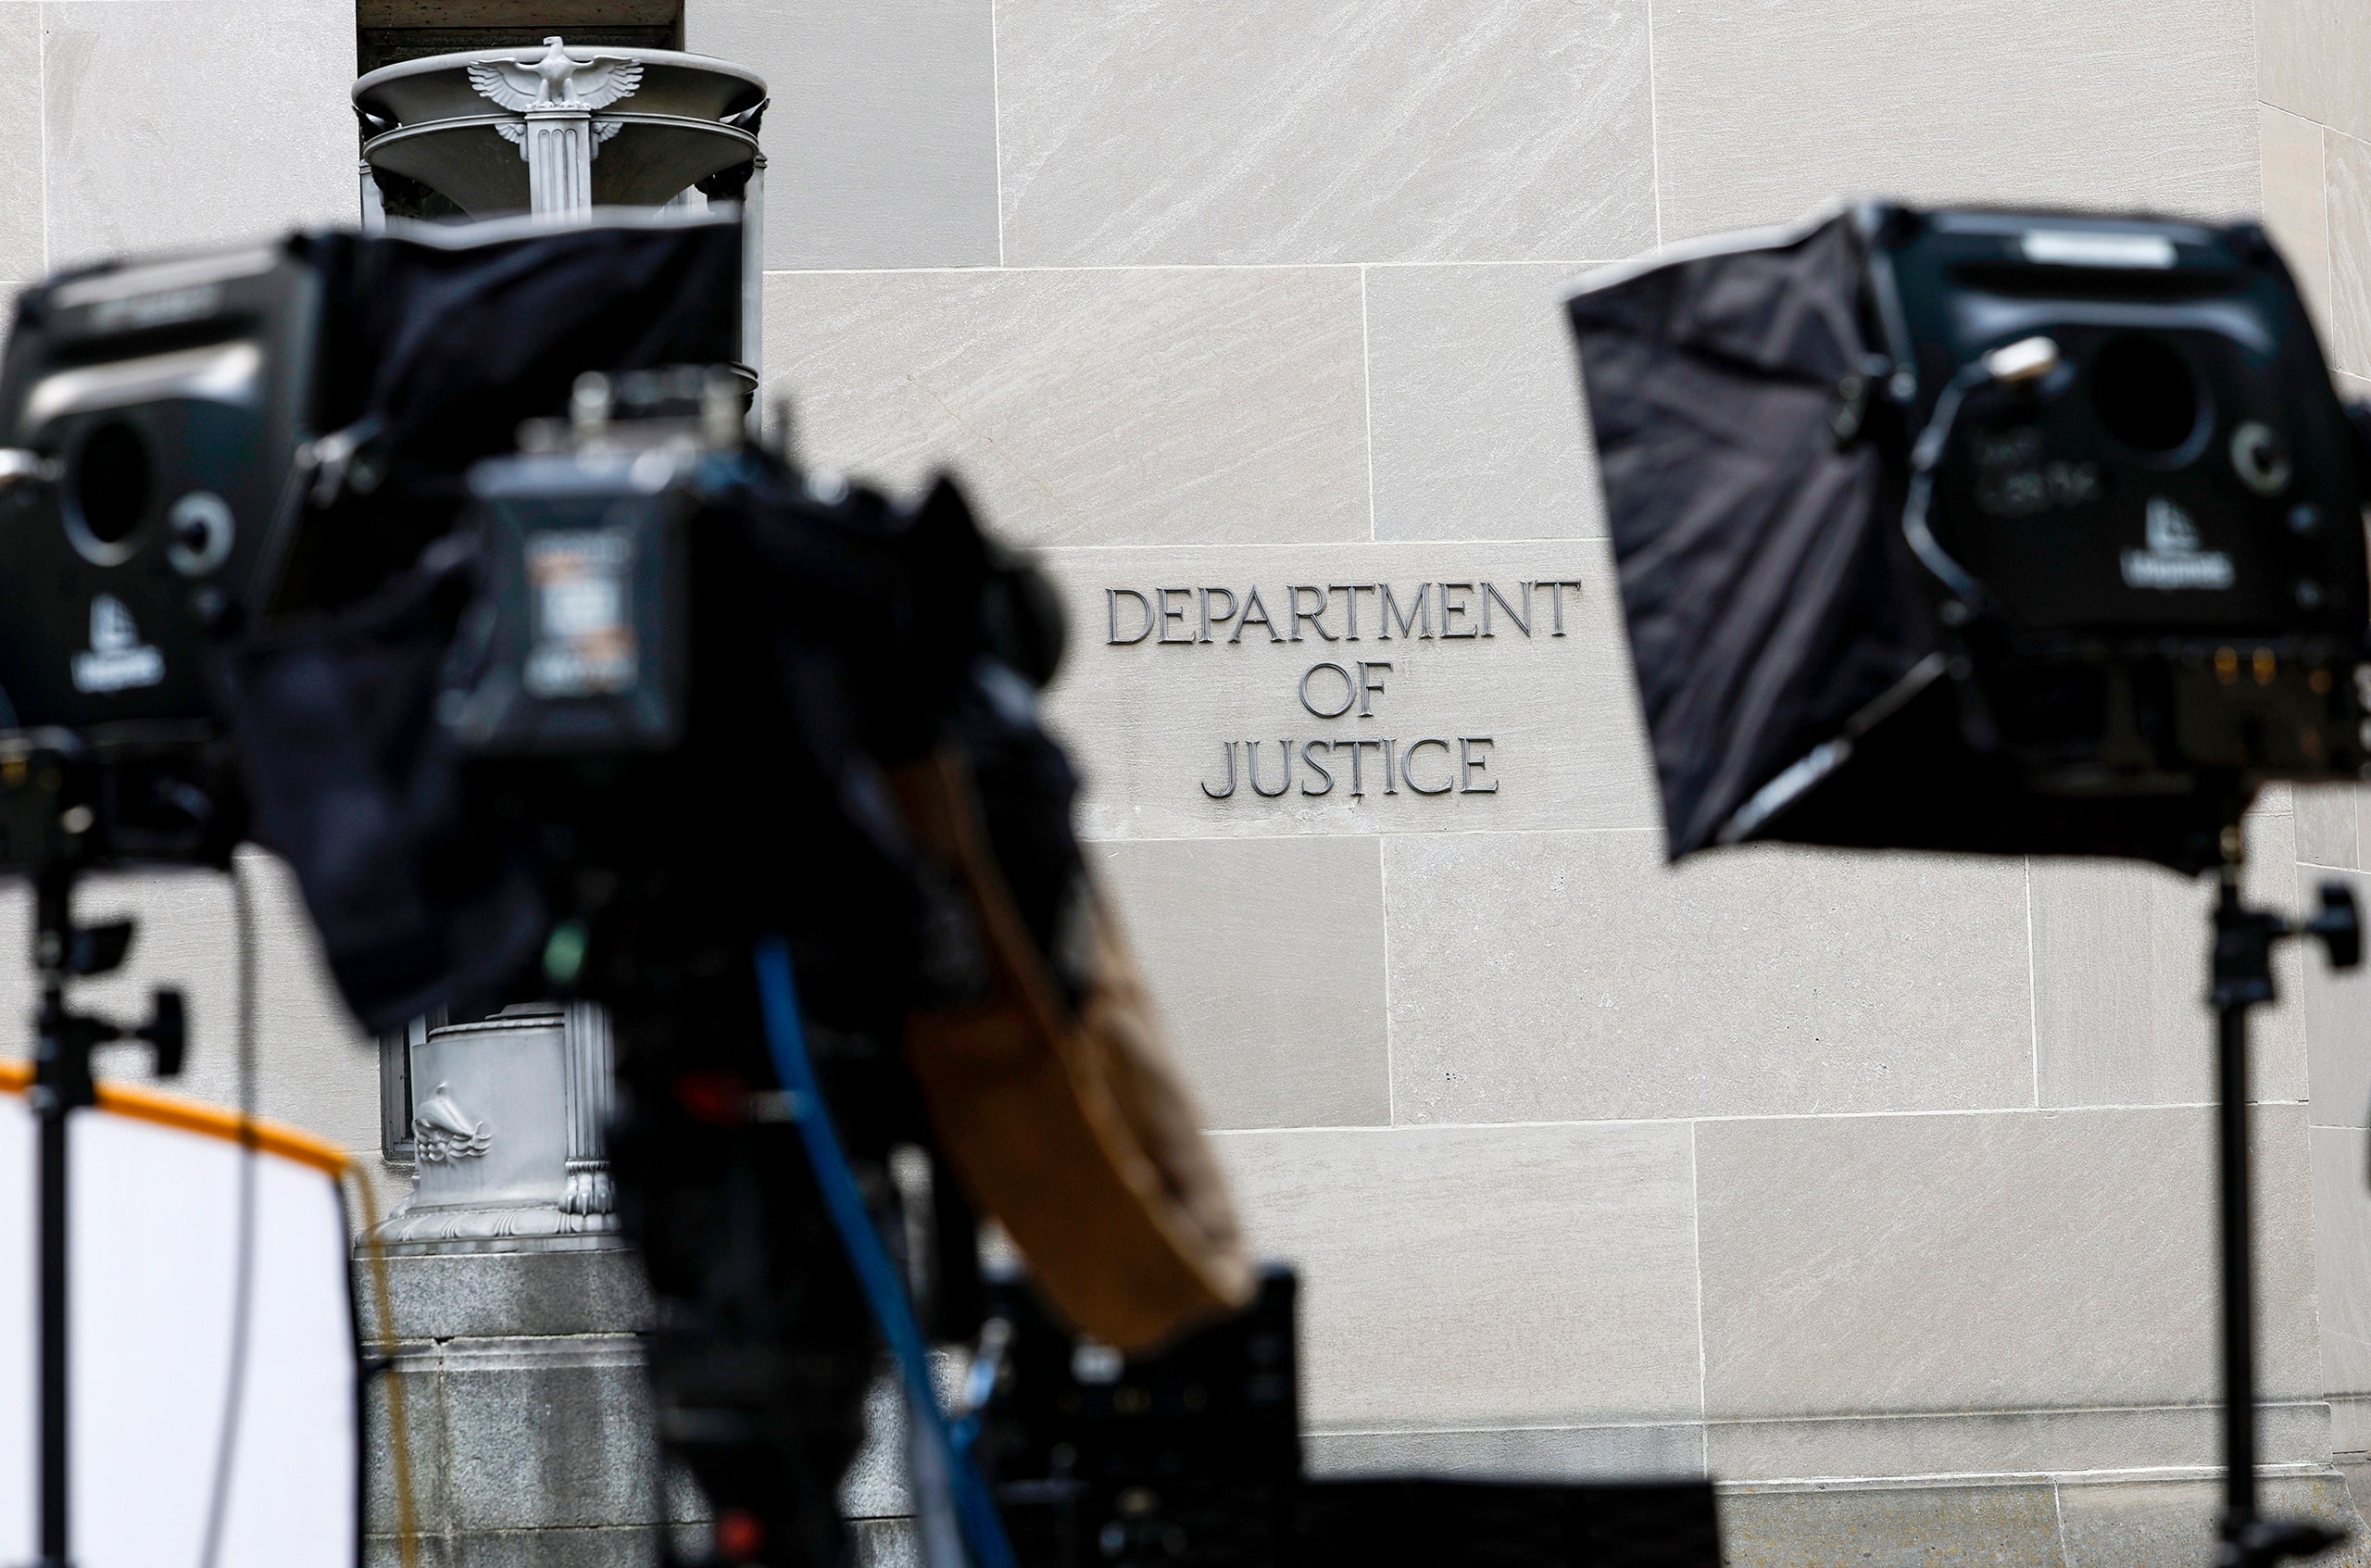 Camera equipment is set up in front of the U.S. Department of Justice.